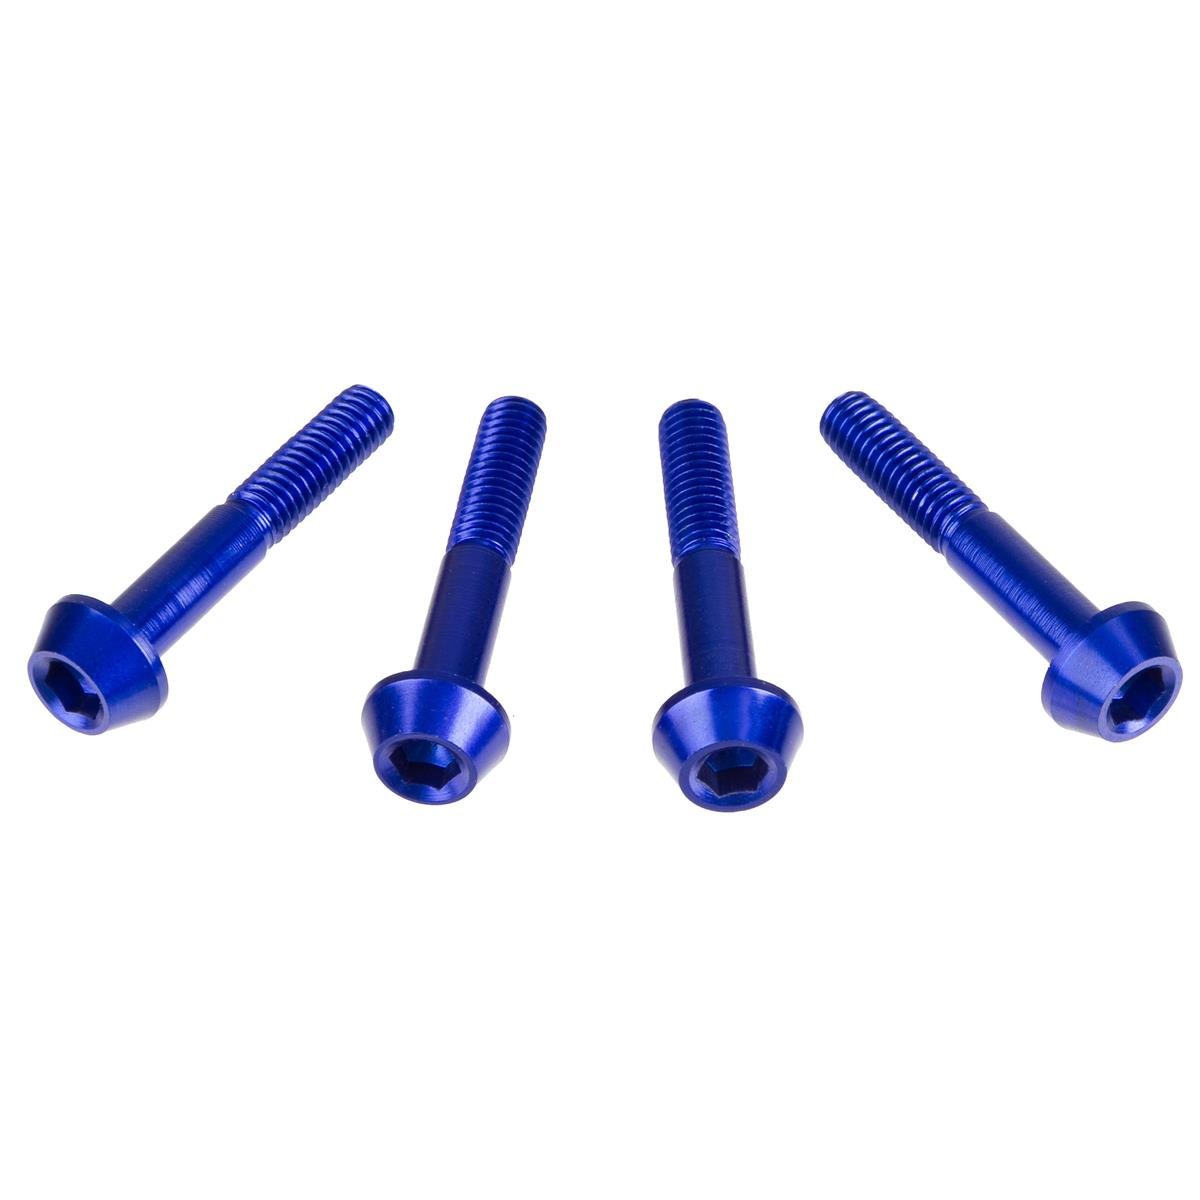 DRC Inner Hex Bolts  M6 x 35 mm, Blue, Pack of 4